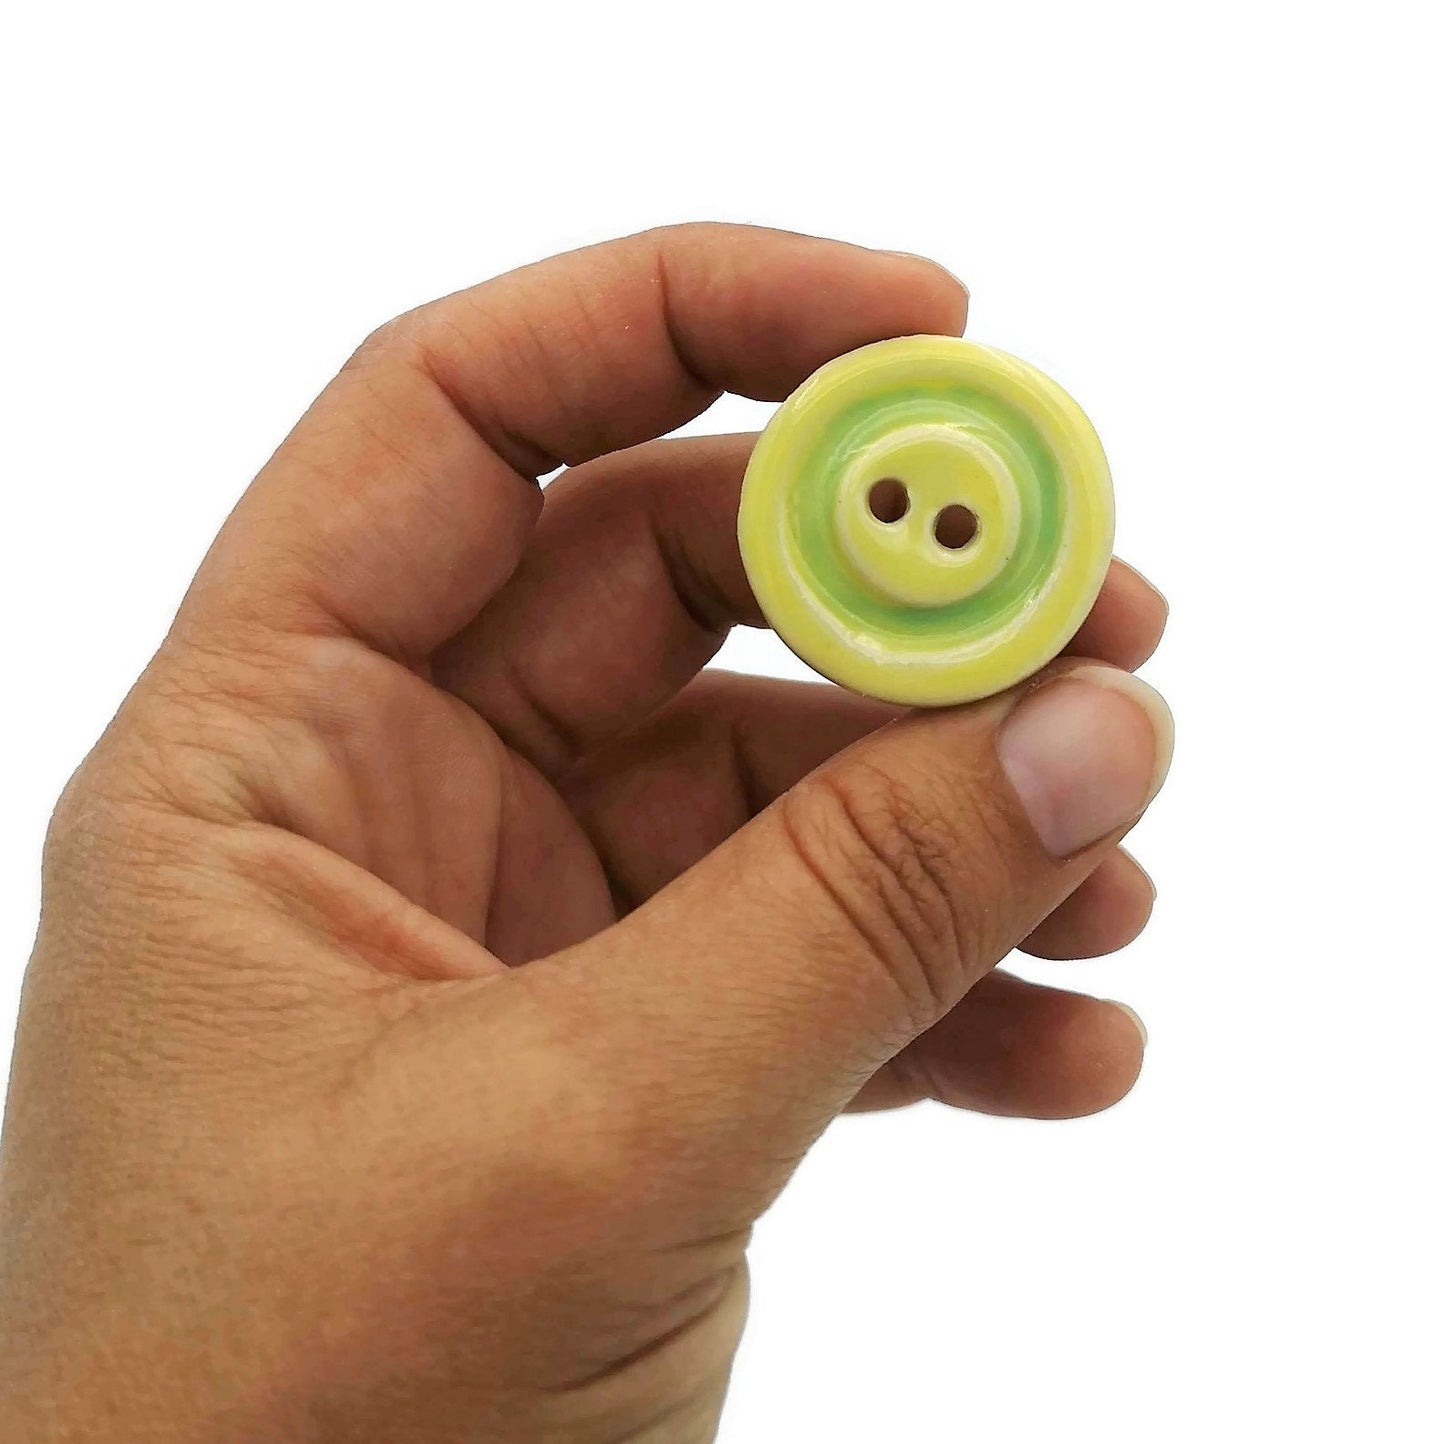 6Pc Green and Yelow Ceramic Buttons 1 inch Wide, Unique Sewing Supplies And Notions, Large Coat Buttons Decorative - Ceramica Ana Rafael